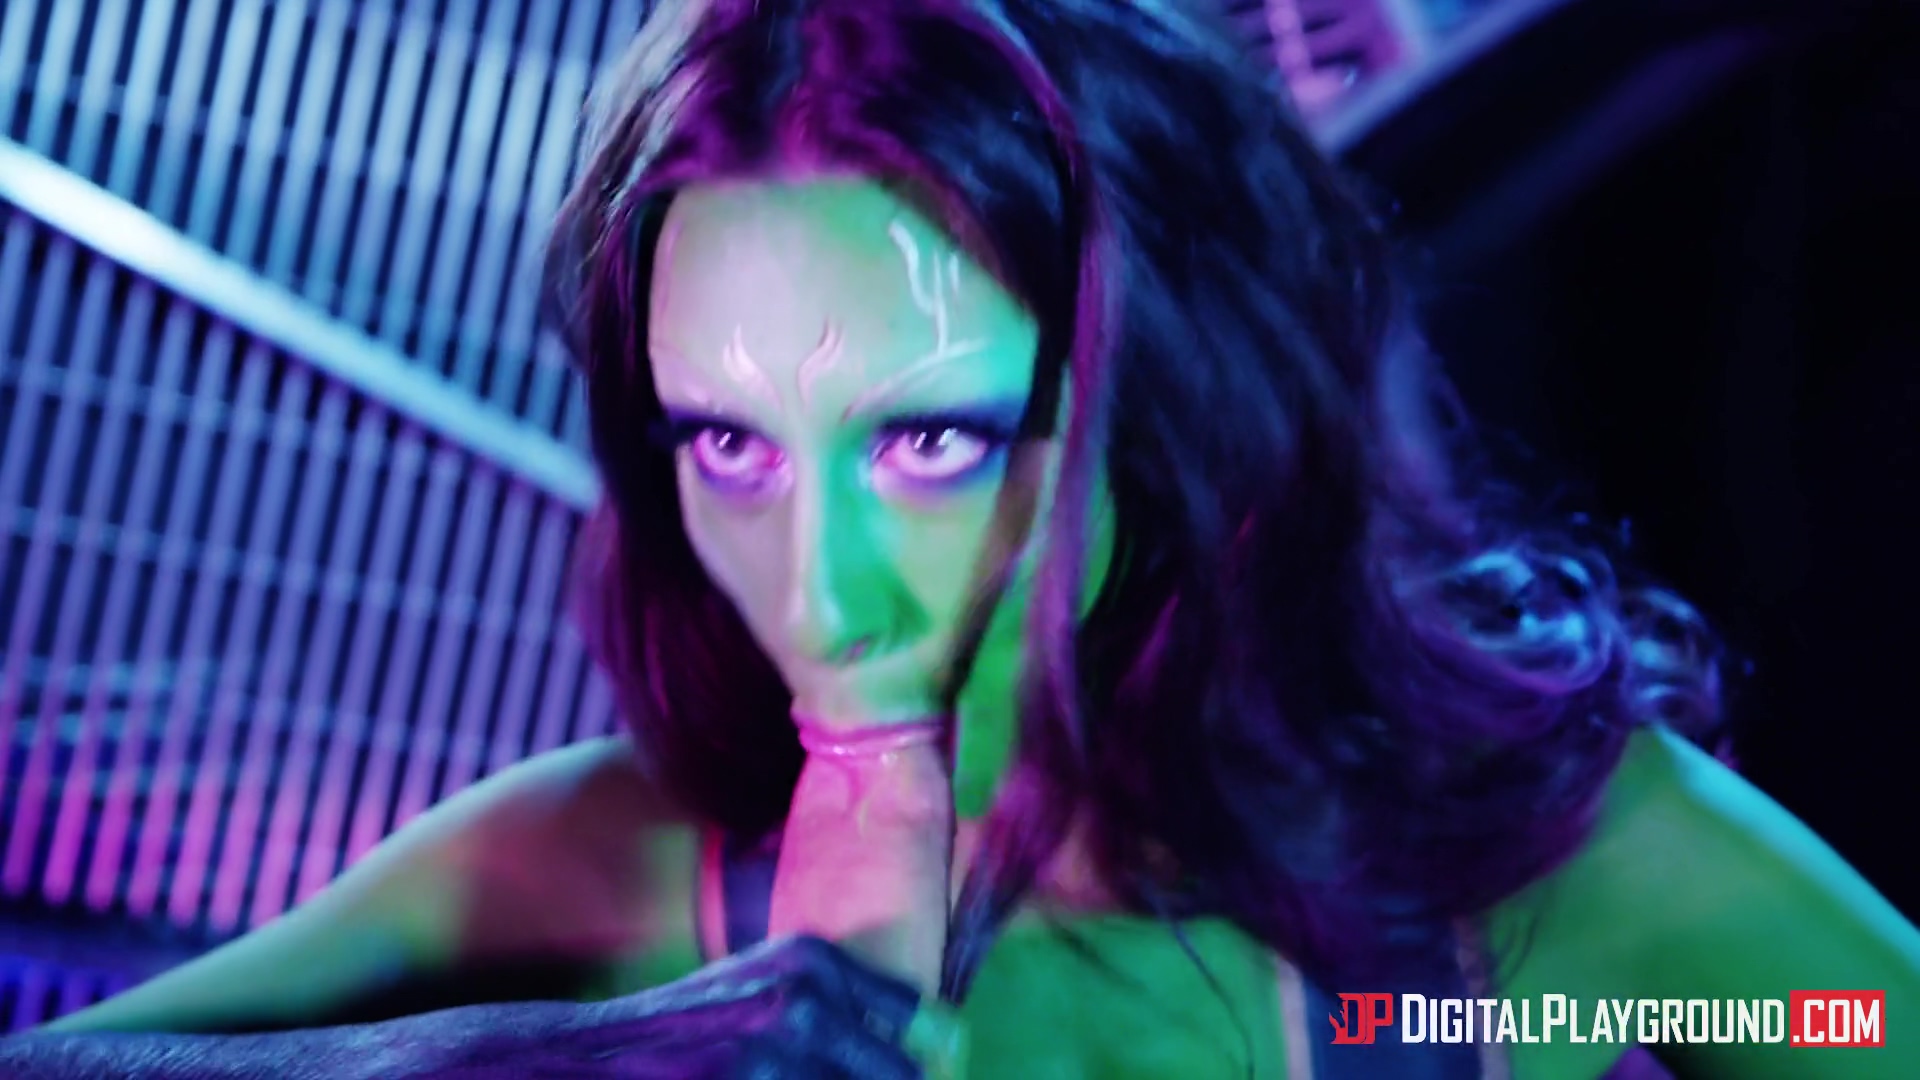 Gamora And Peter Are Doing Sex - Peter And Gamora Saved The Galaxy Once Again Porn Video - VXXX.com